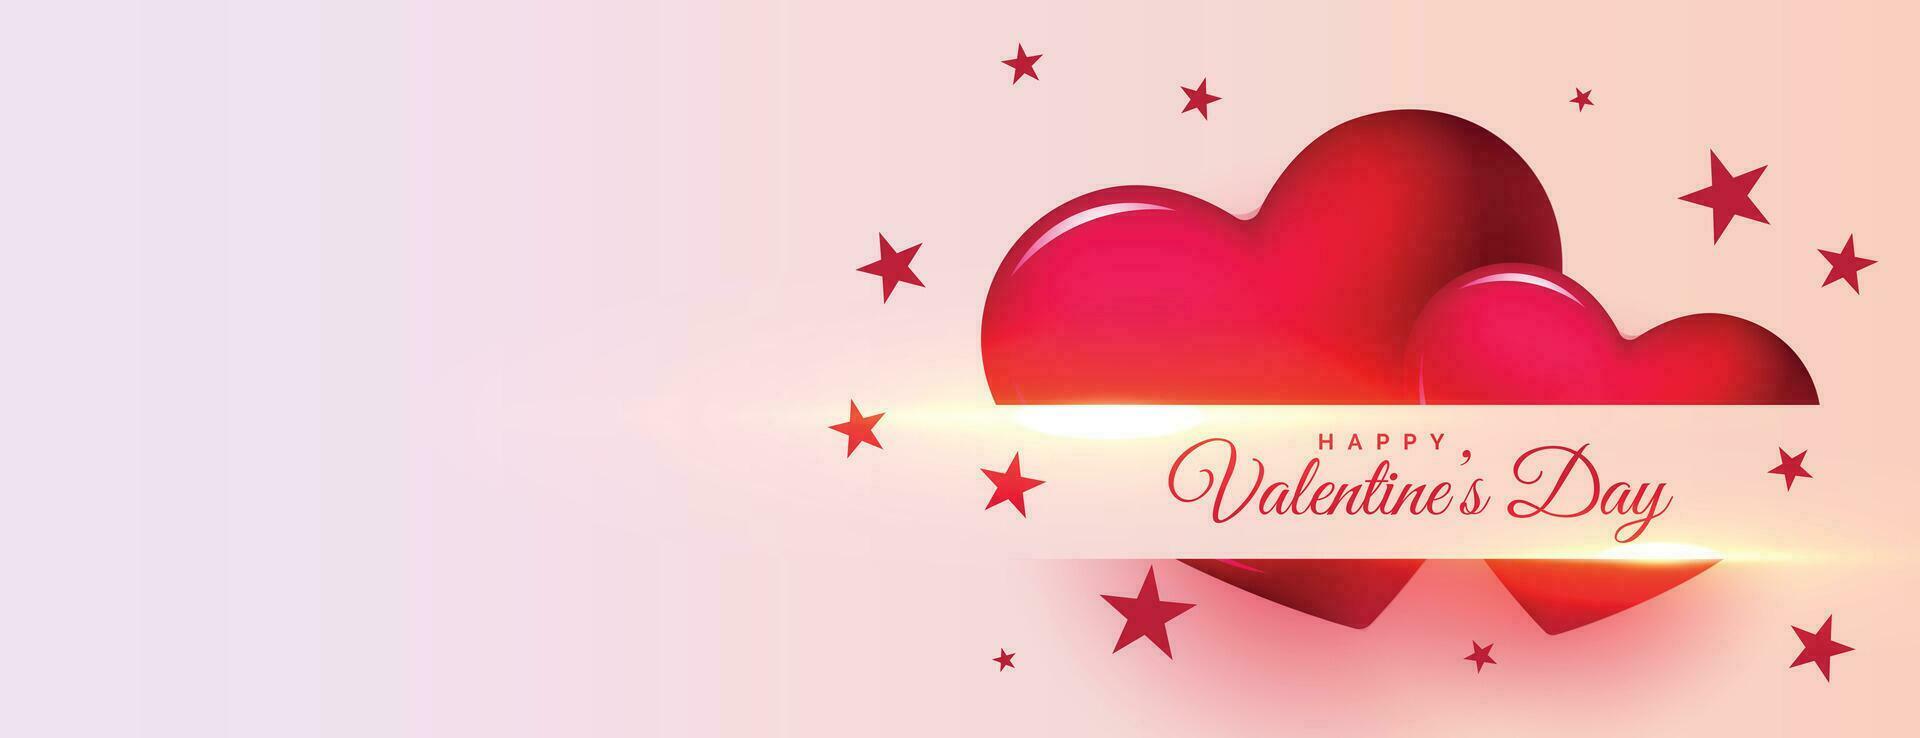 happy valentines day celebration hearts banner with text space vector